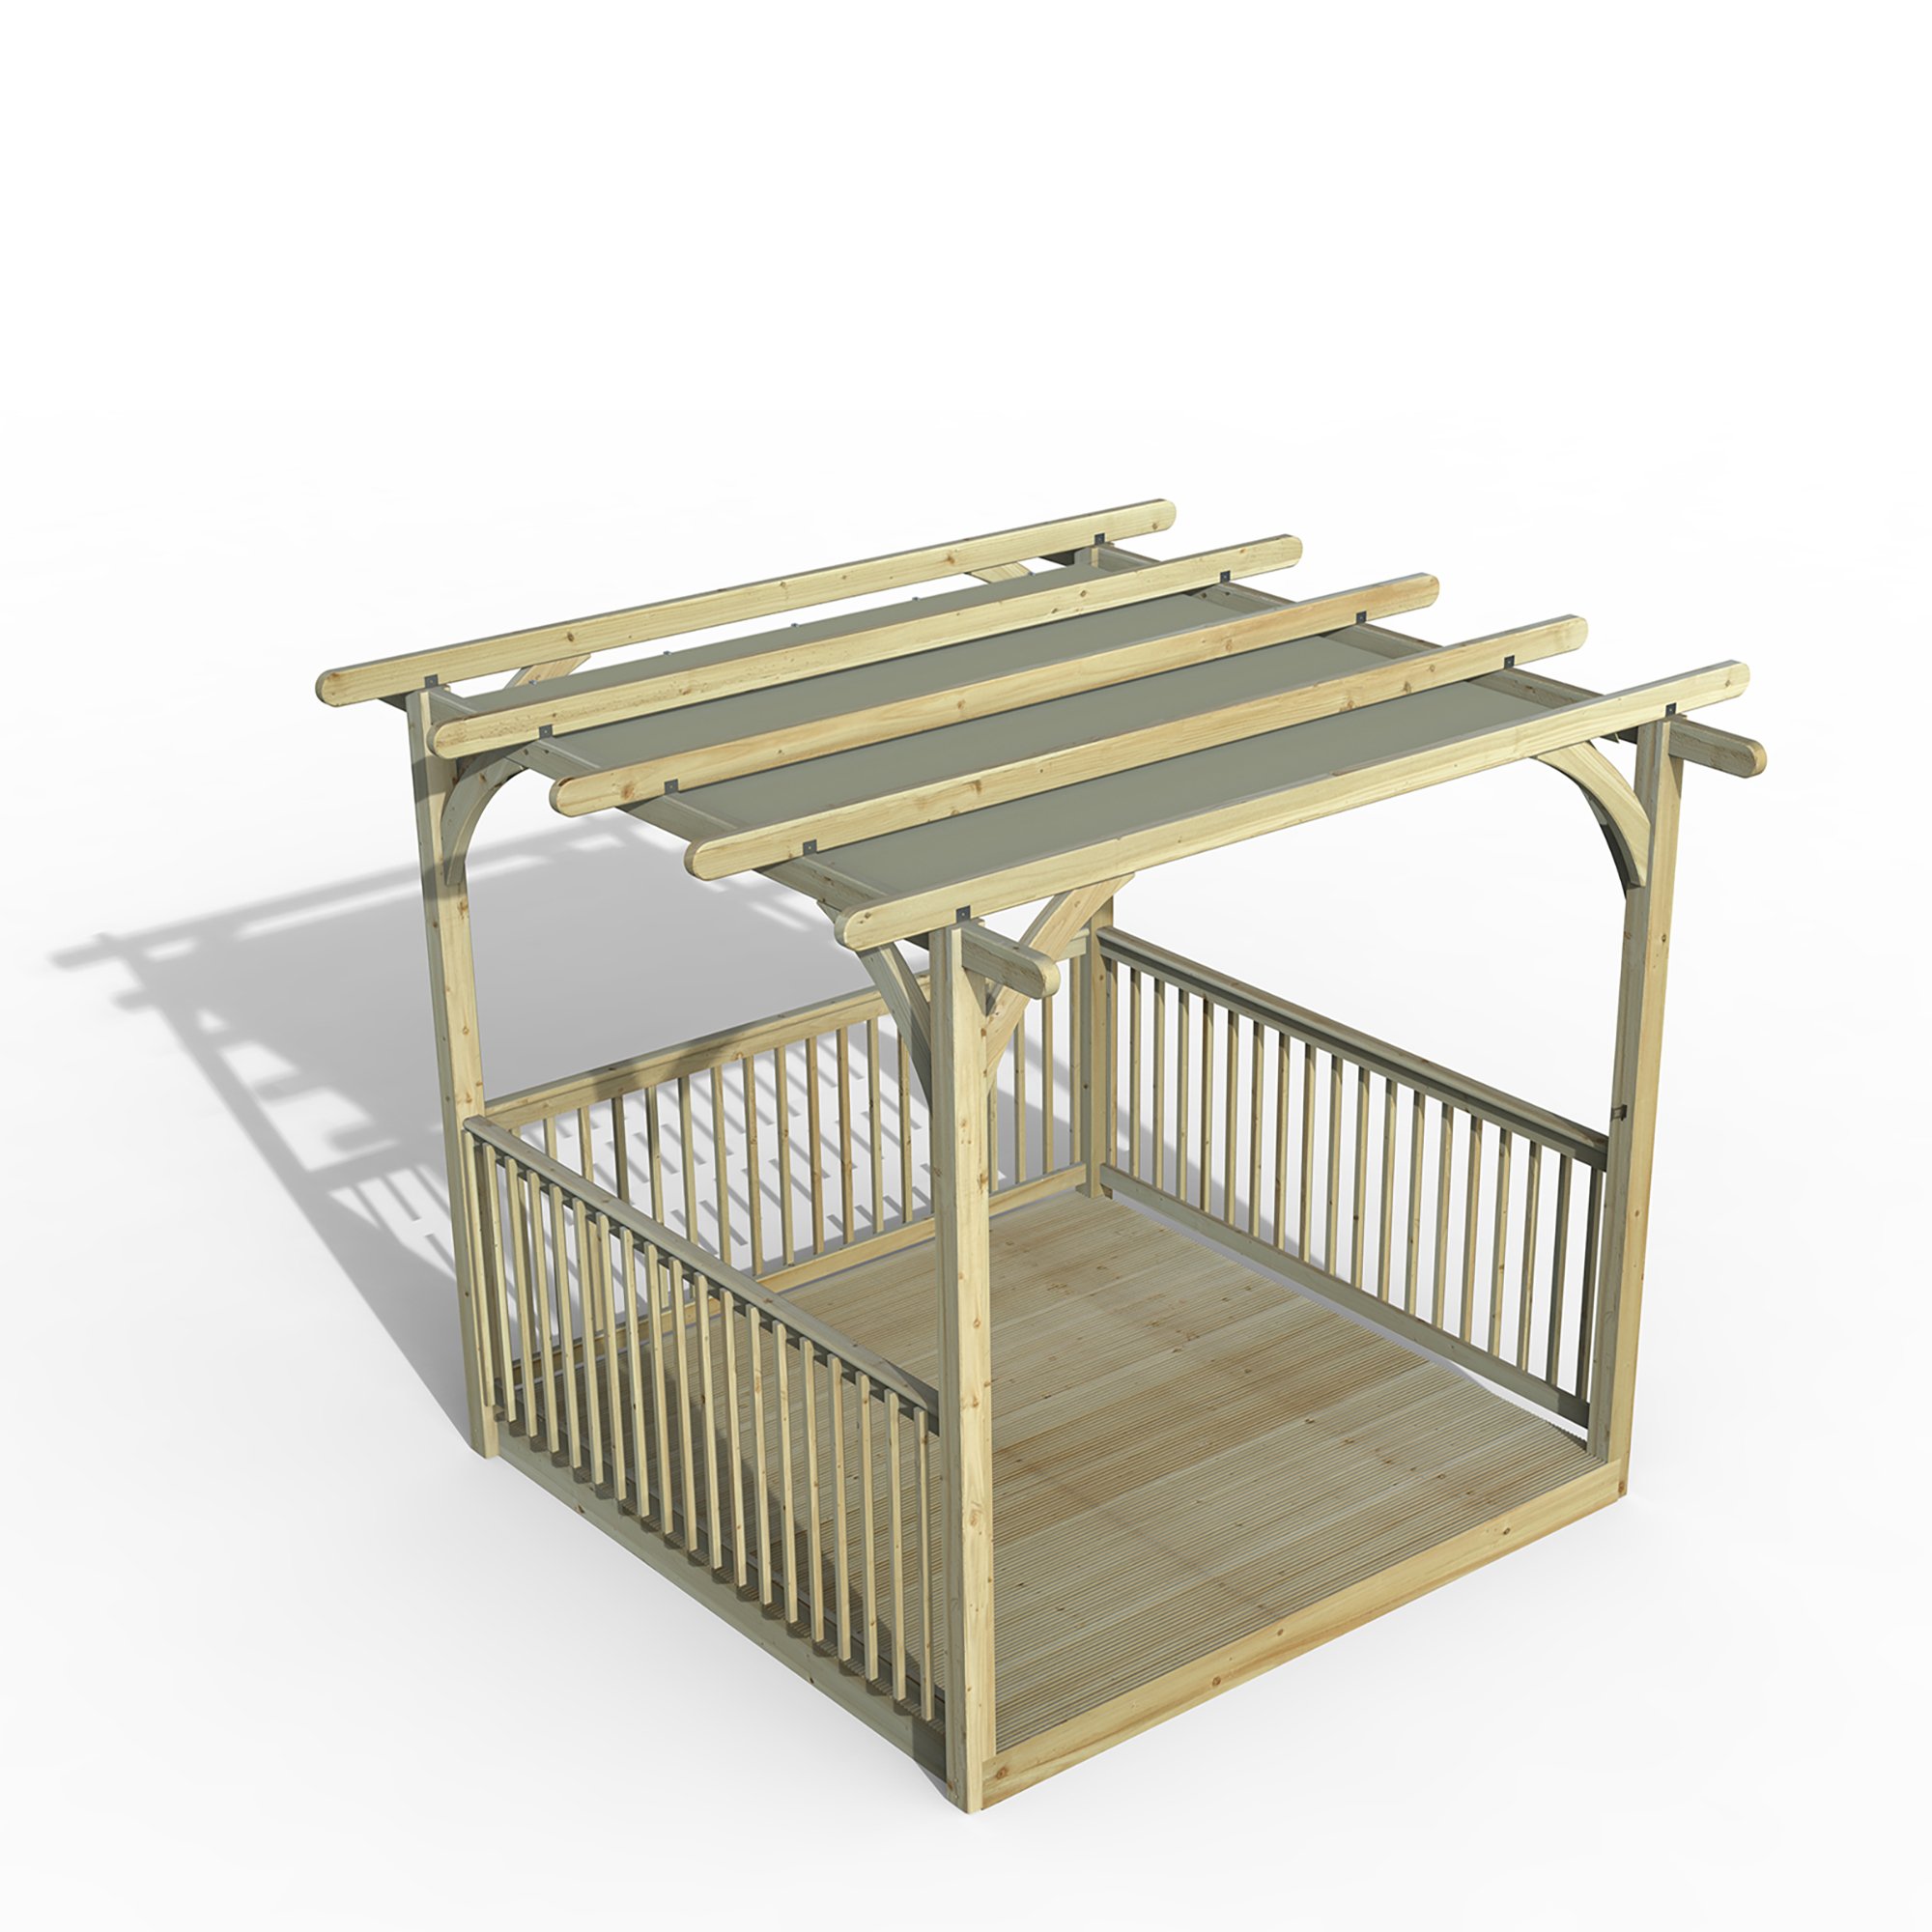 Forest Garden 2.4 x 2.4m Ultima Pergola and Decking Kit with 3 x Balustrade and Canopy